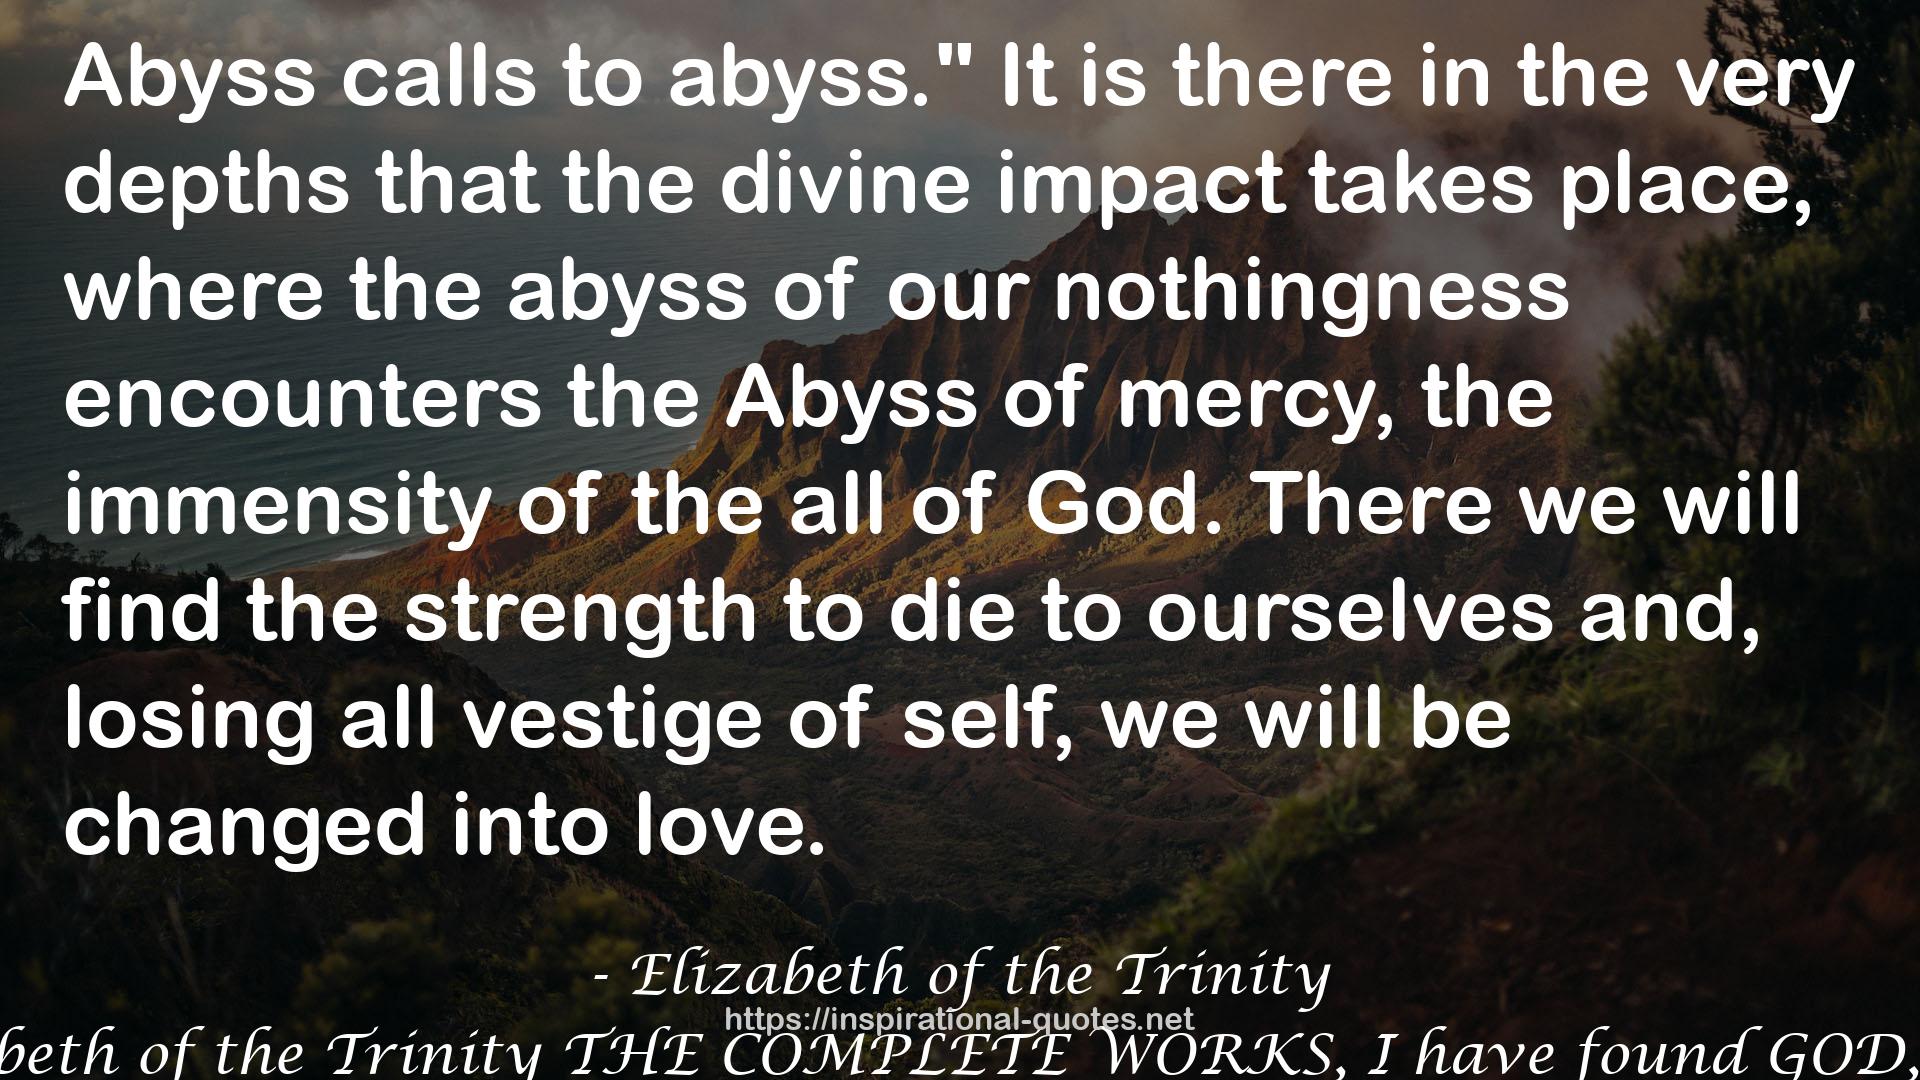 Elizabeth of the Trinity THE COMPLETE WORKS, I have found GOD, Vol 1 QUOTES